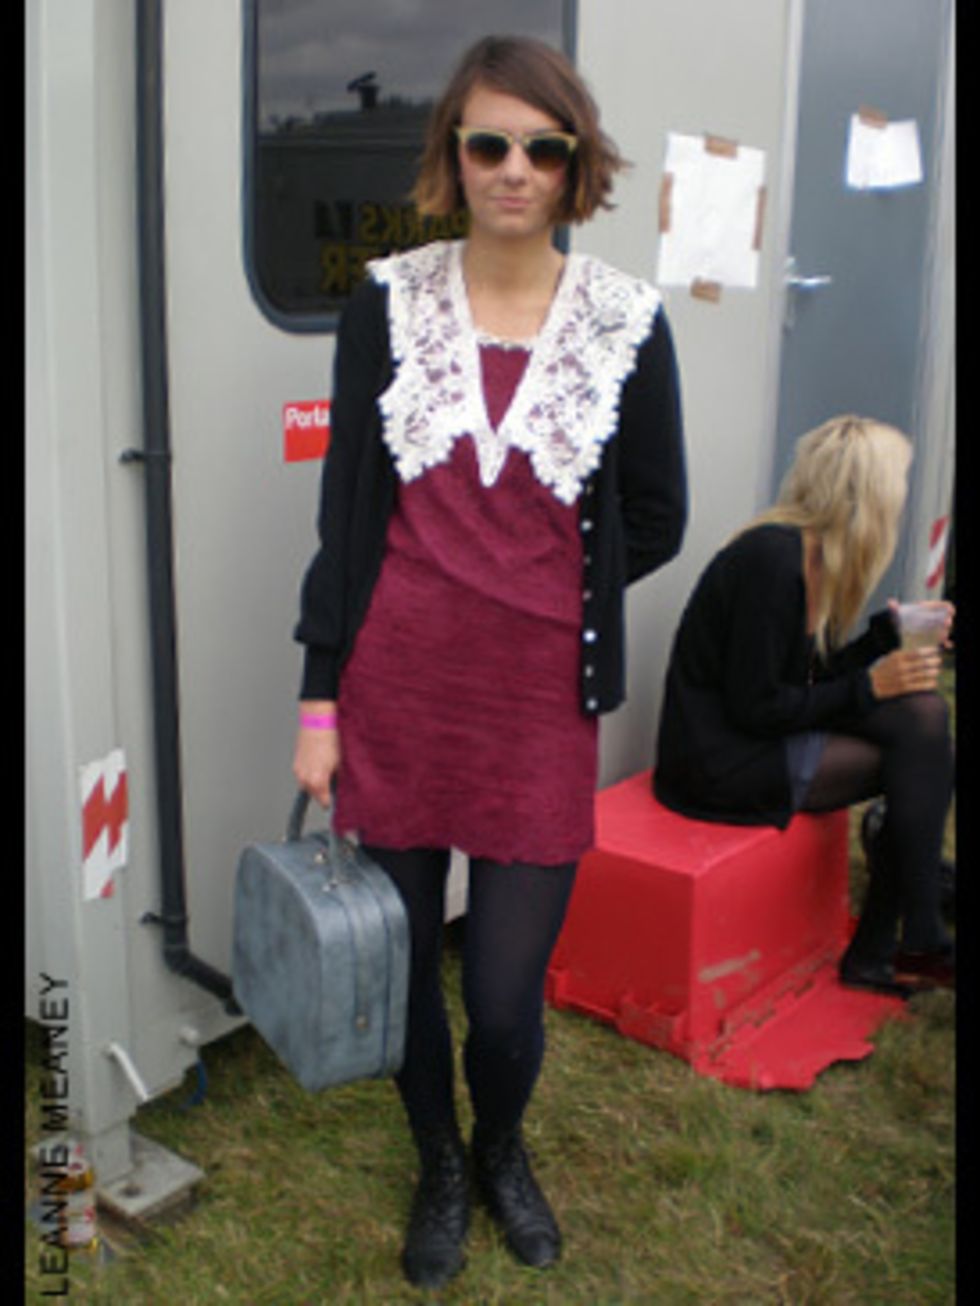 <p>Harry Webb, a 23 year old who works in Fashion PR is wearing a Dress from Beyond Retro, Boot's from Clarks and a vintage Bag.</p>